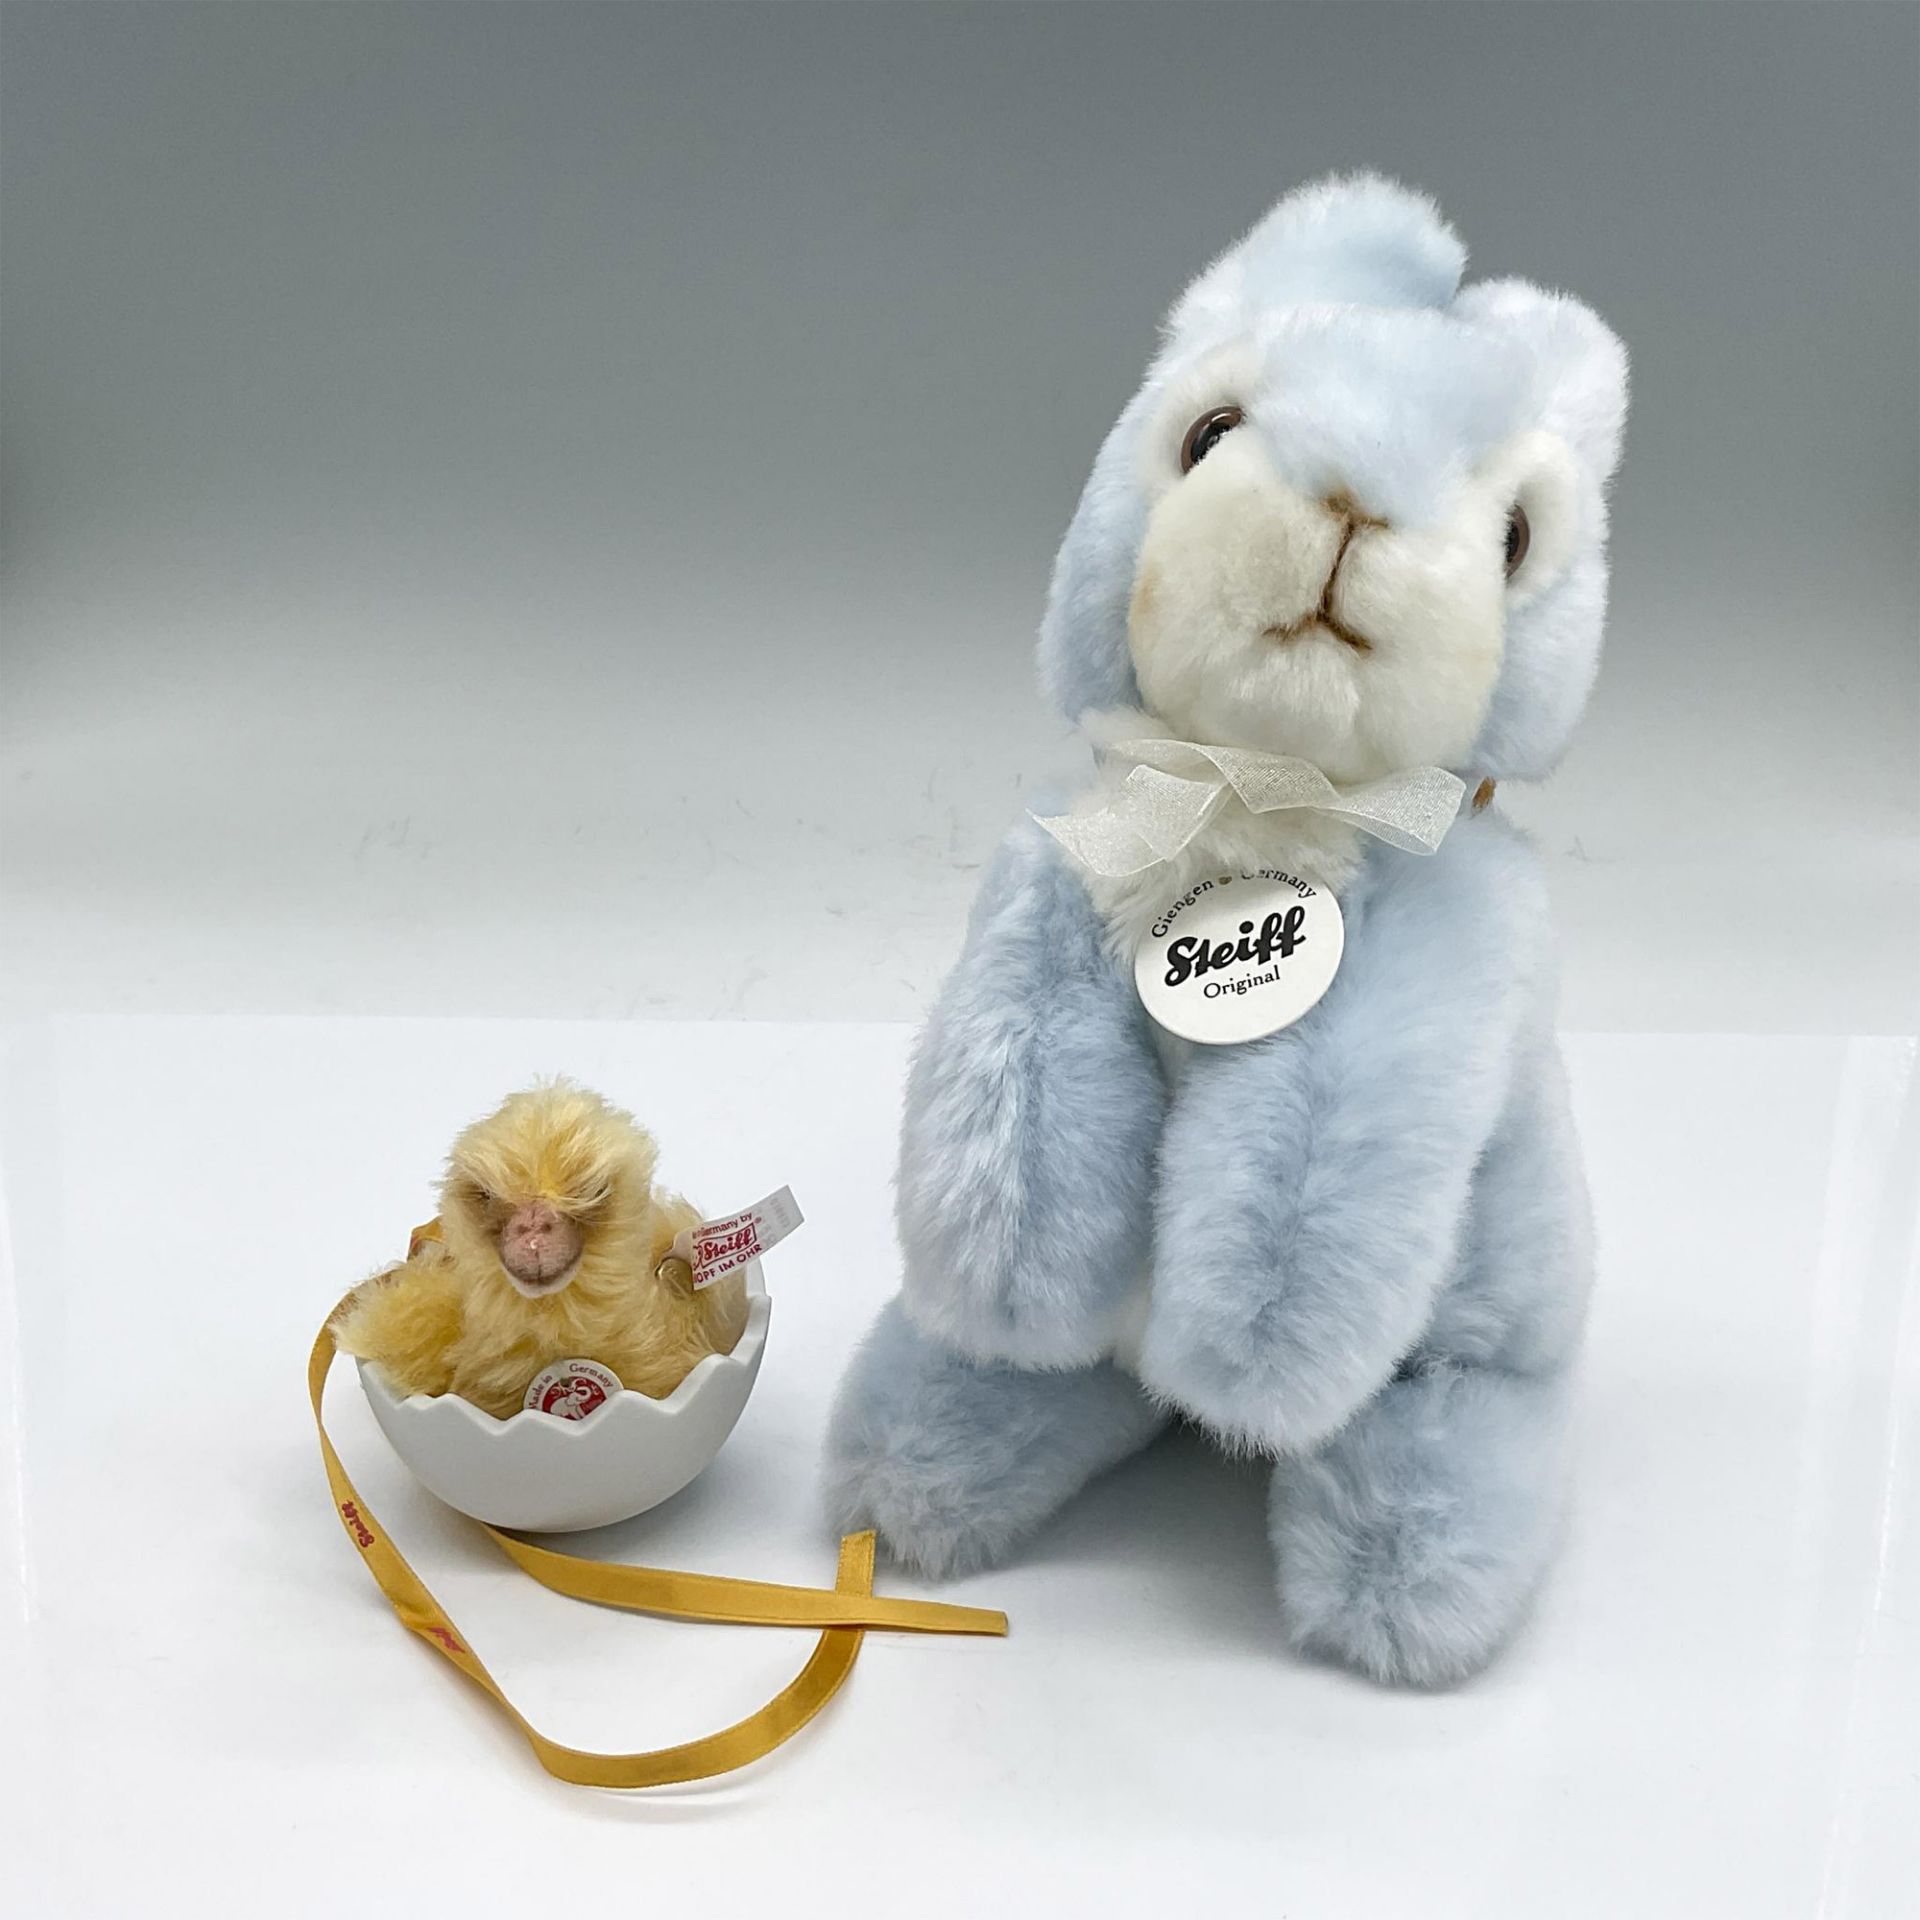 2pc Steiff Chick in Egg Ornament + Plush Blue Bunny - Image 2 of 5